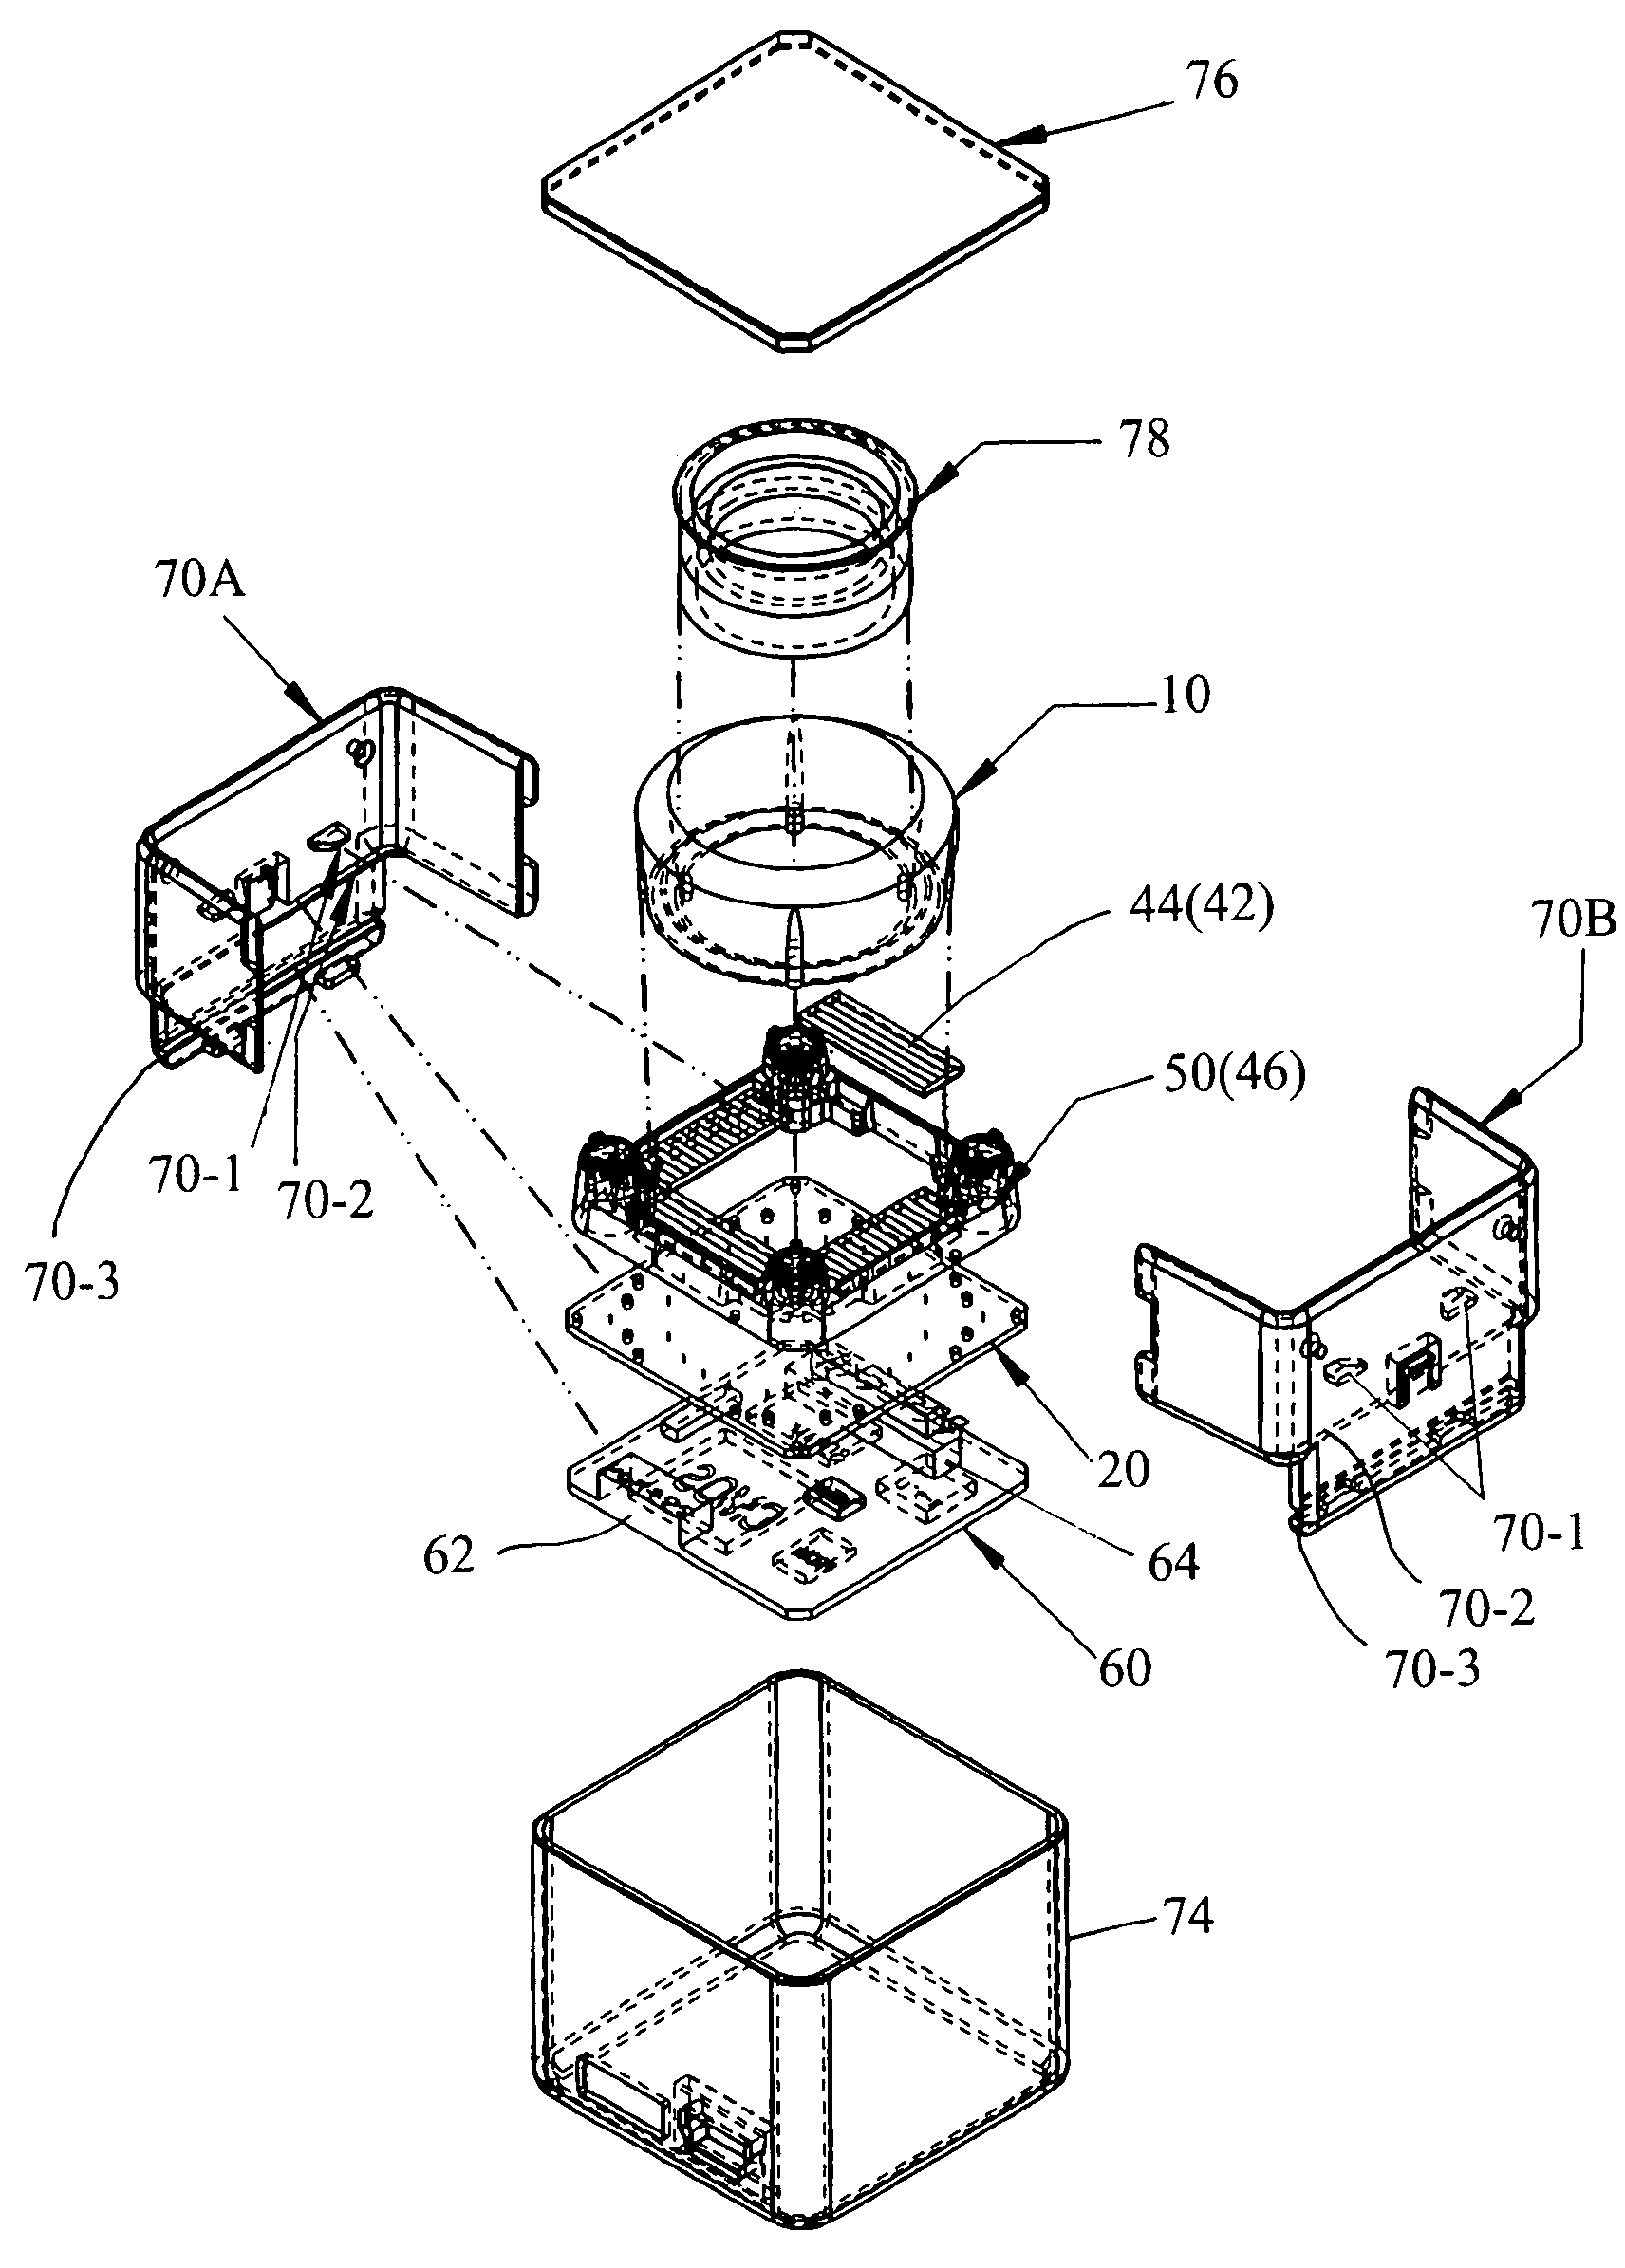 Image capturing apparatus having an image capturing system disposed close to an illumination system